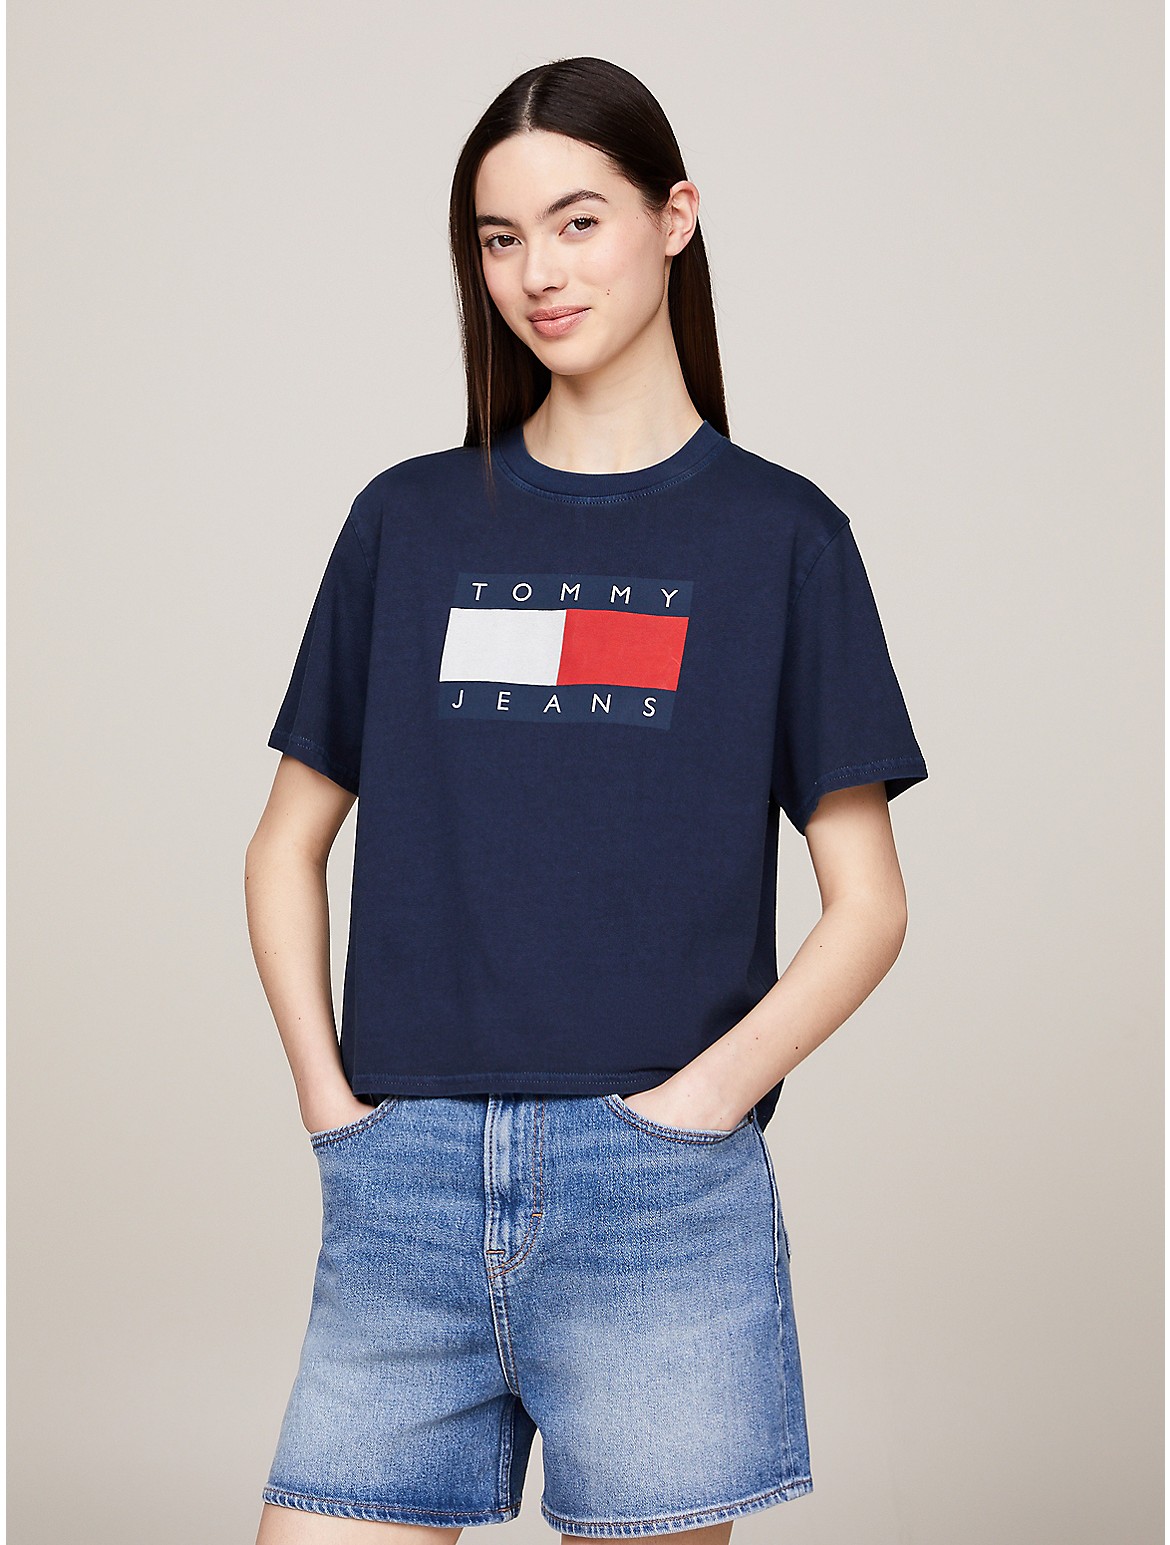 Tommy Hilfiger Women's Boxy Fit Flag Badge T-Shirt